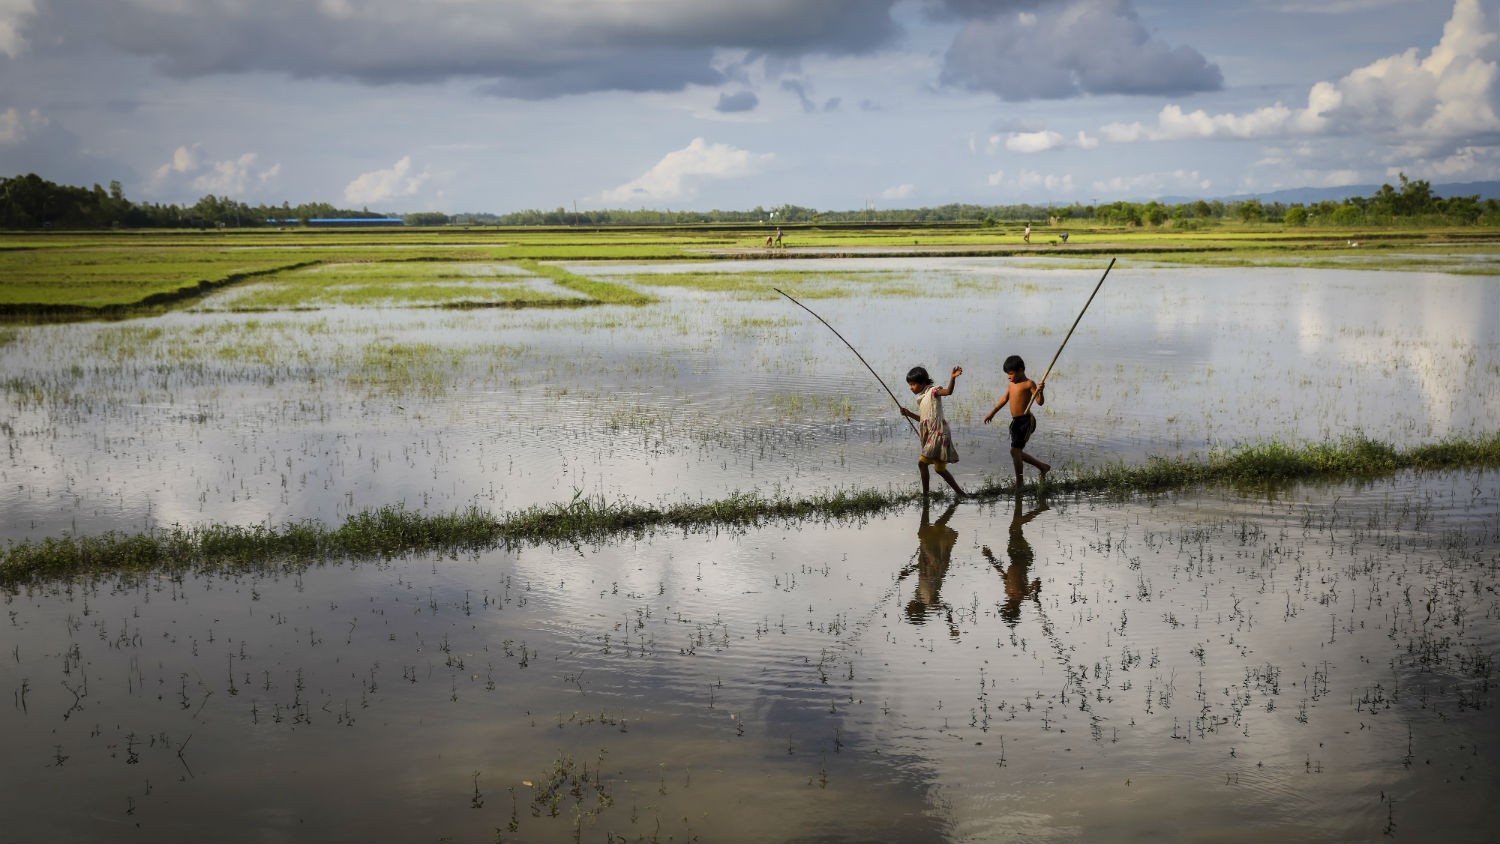 Reflections, brother and sister, Reshma (8) and Ridoy (9) are fishing on floodwaters in Cox’s Bazaar, Bangladesh after a monsoon.